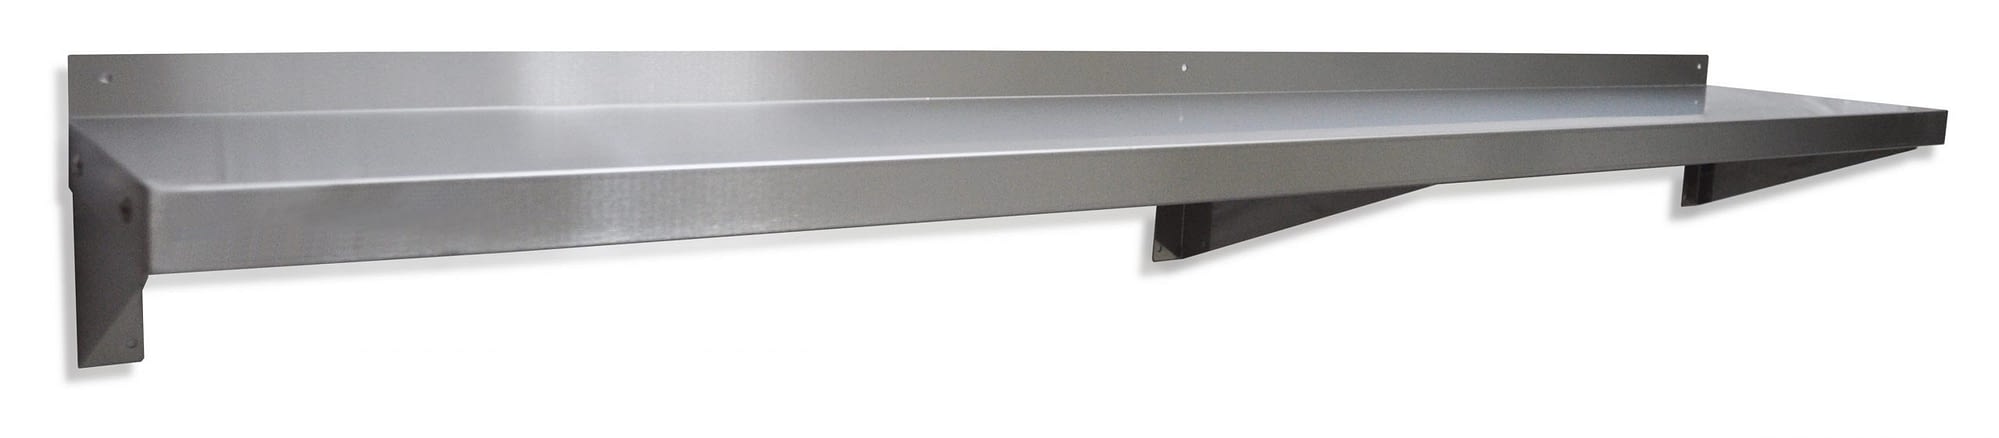 Stainless Steel Solid Wall Shelf, 1800 X 300mm deep